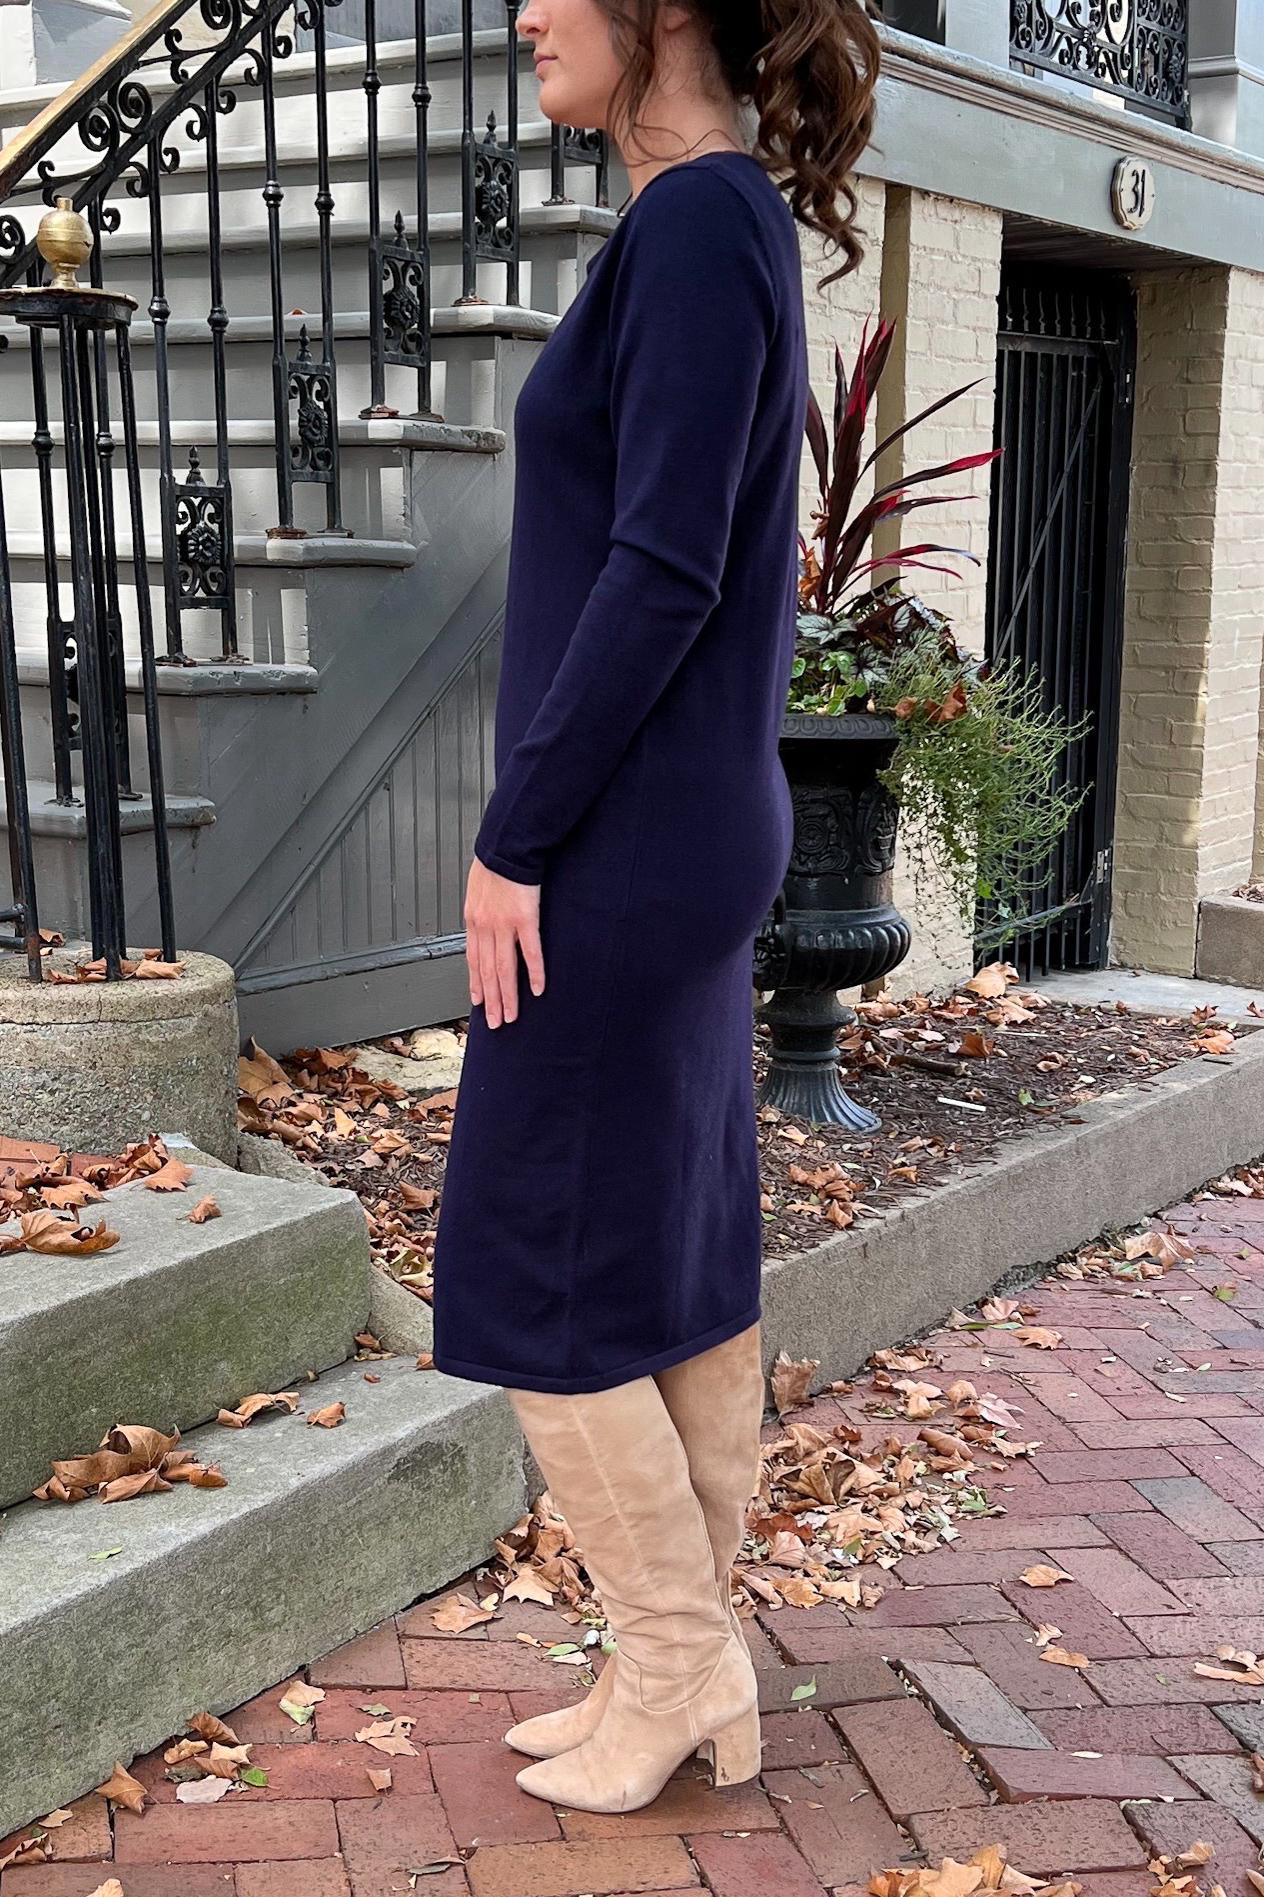 THE QUINN EVERYDAY SCOOP NECK SWEATER DRESS IN NAVY